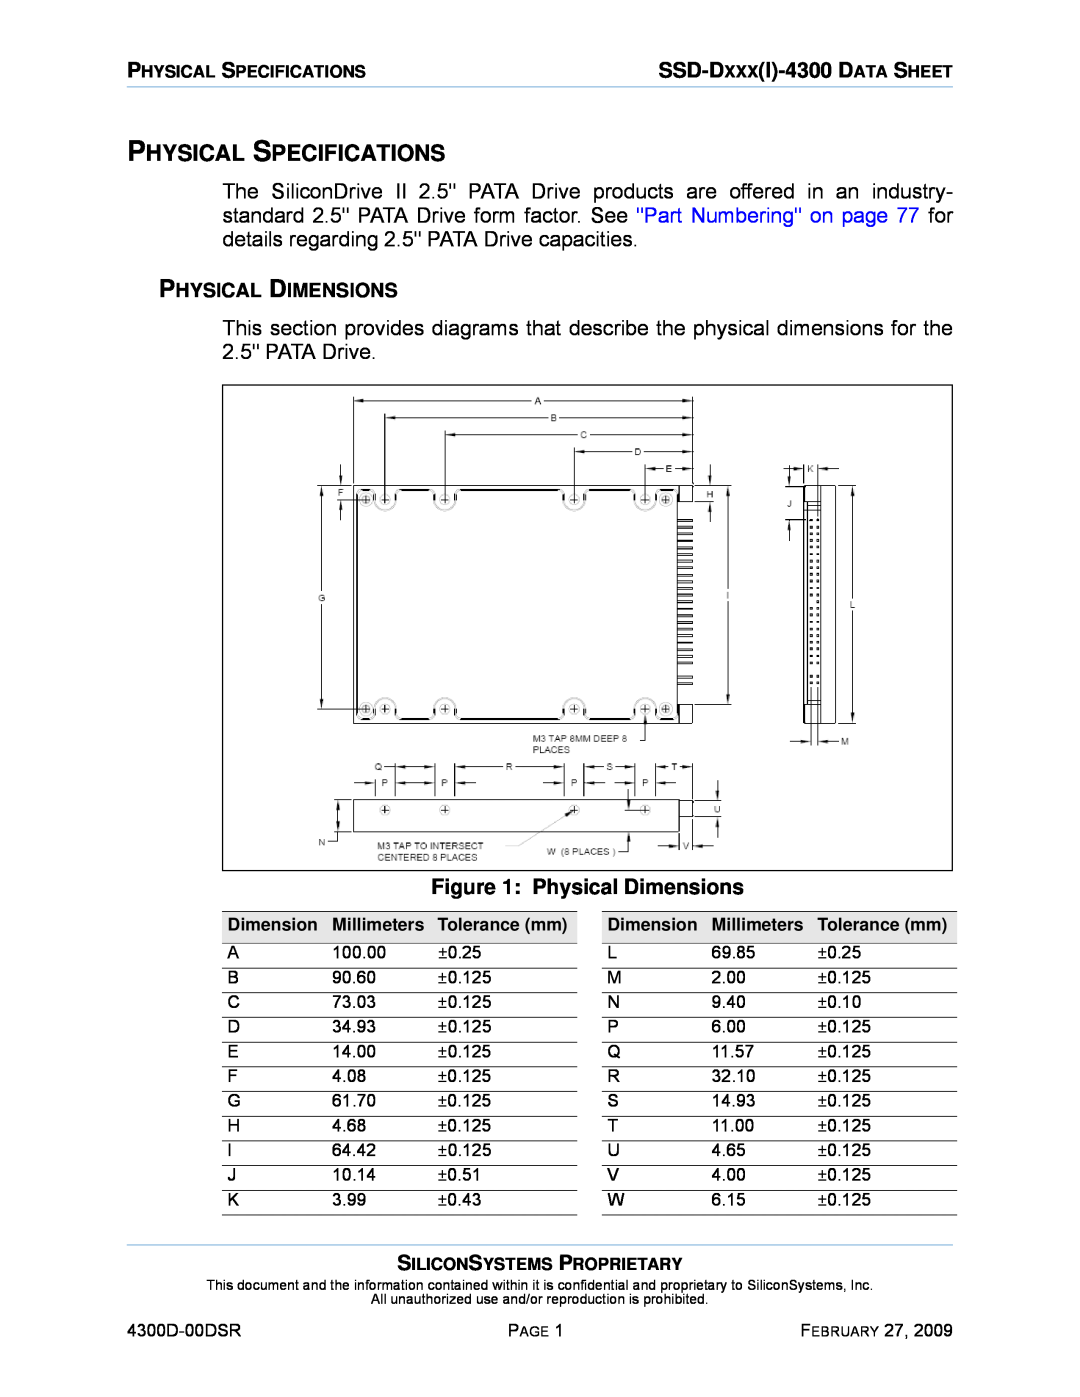 Silicon Image SSD-D32G(I)-4300 manual Physical Specifications, Physical Dimensions 